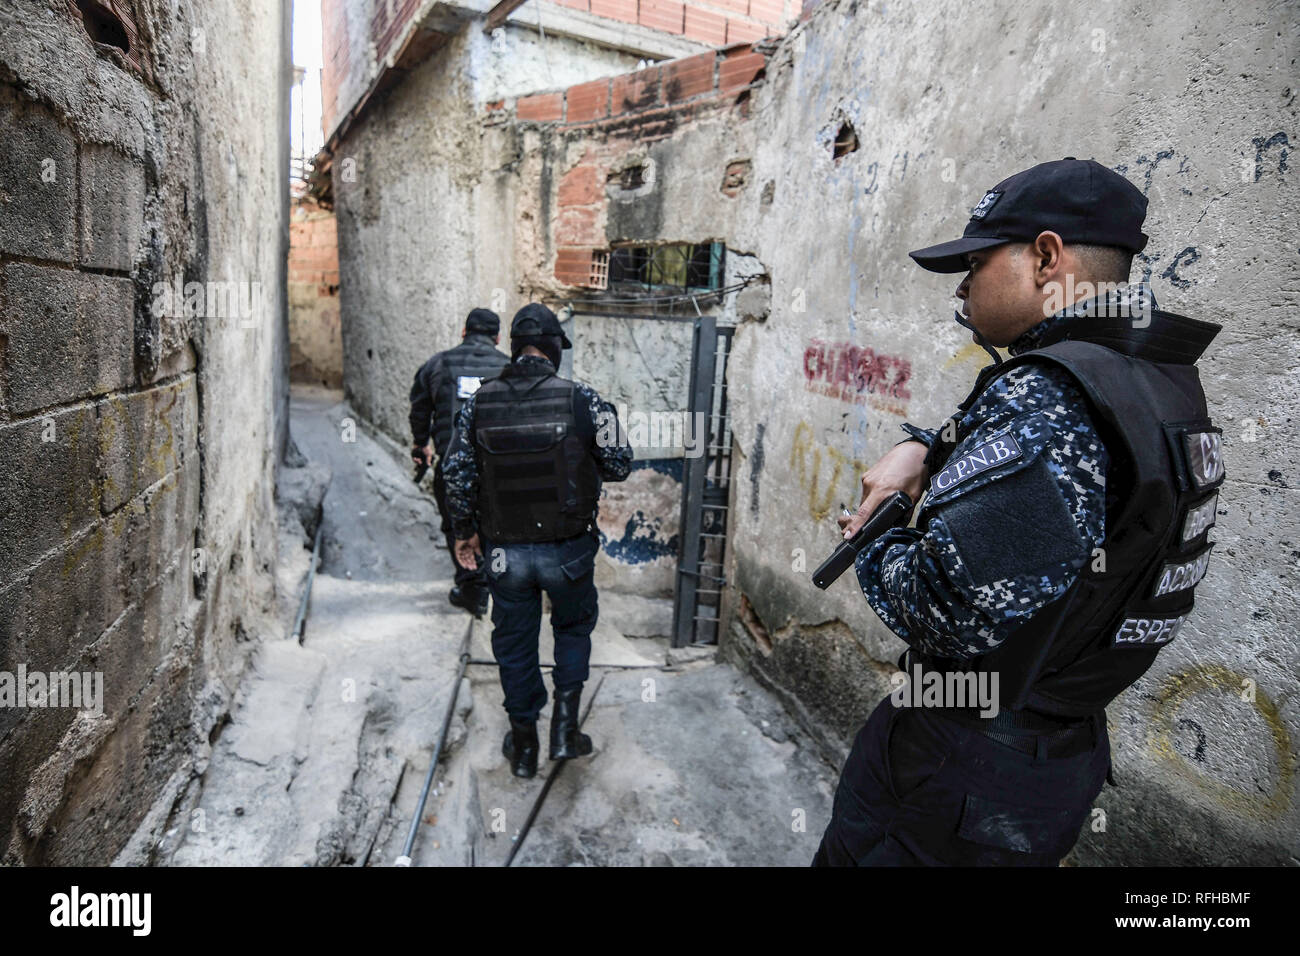 Caracas, Venezuela. 25th Jan, 2019. Members of the Bolivarian National Police Special Forces (''˜FAES' in Spanish) seen taking position during a Police raid operation against criminal groups at Petare slum in Caracas. Credit: Roman Camacho/SOPA Images/ZUMA Wire/Alamy Live News Stock Photo